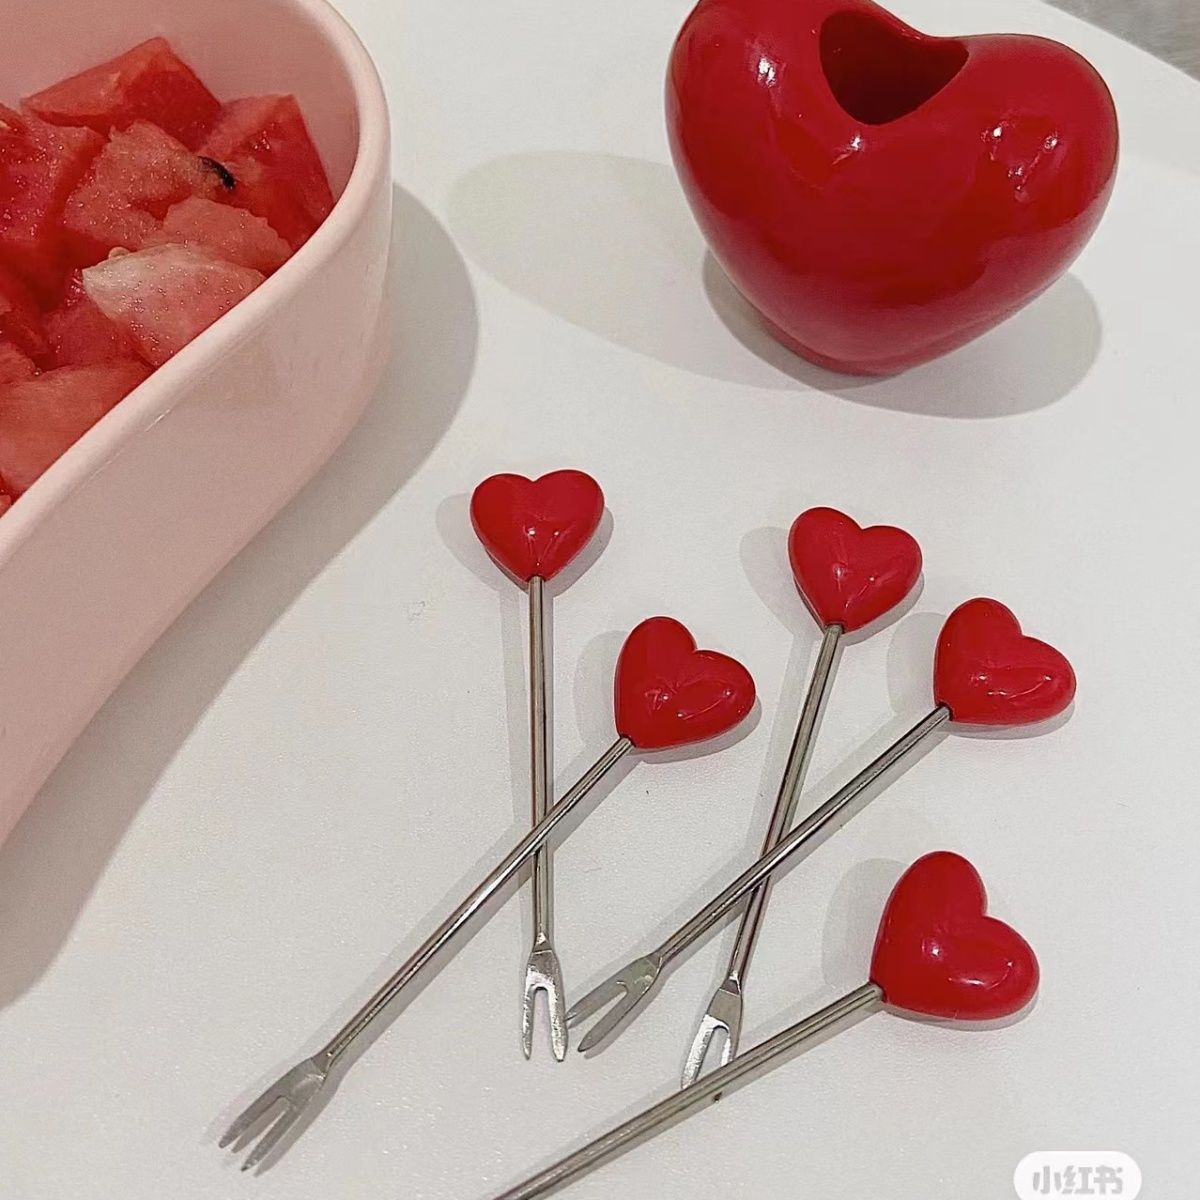 ins little red book home creative love stainless steel fruit fork net red popular high-value cute fruit sign